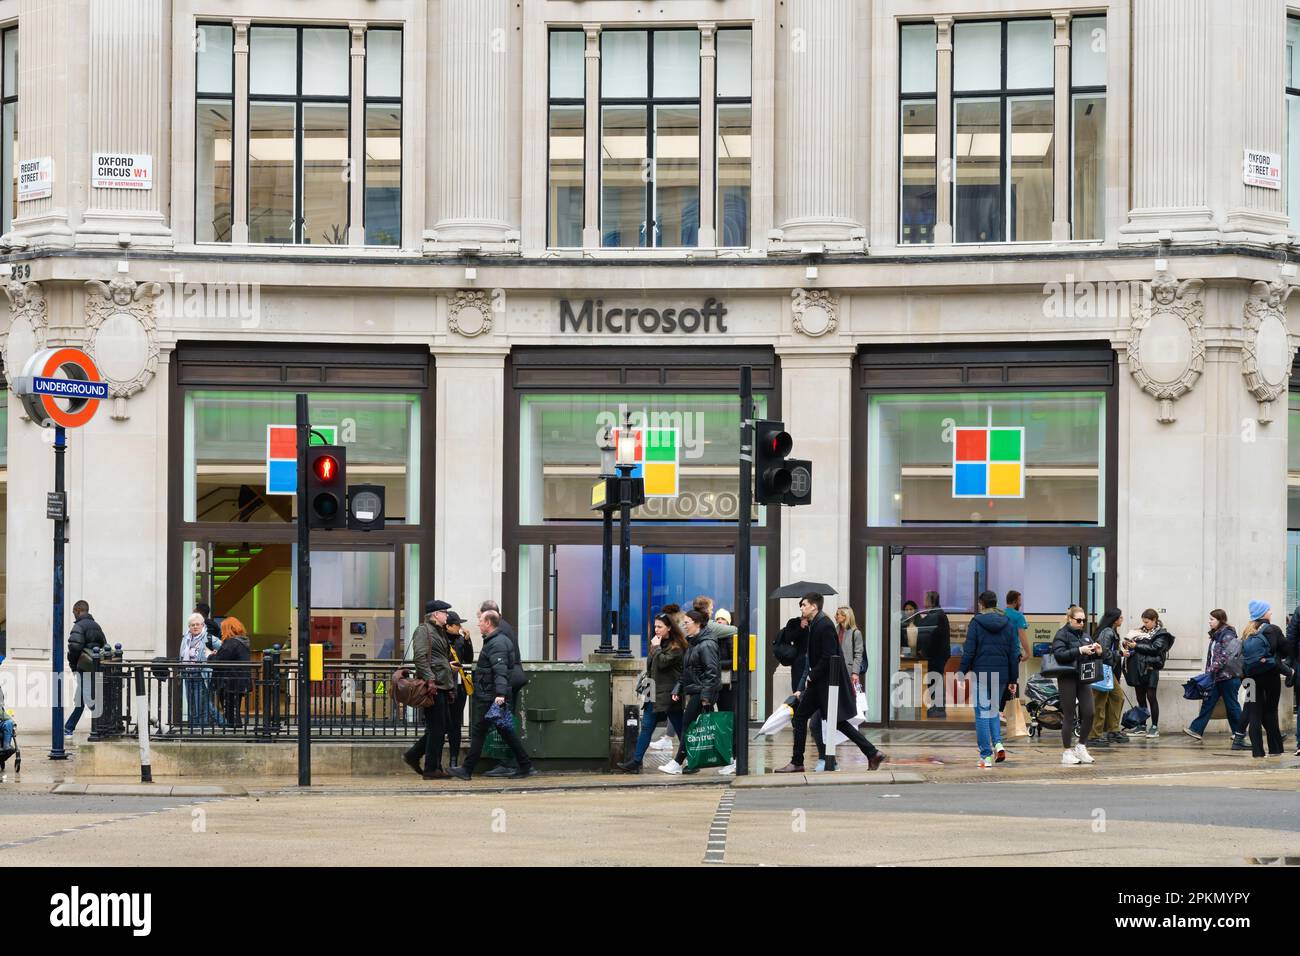 London, UK - March 17, 2023; Microsoft store facade in Oxford Circus London on wet day Stock Photo